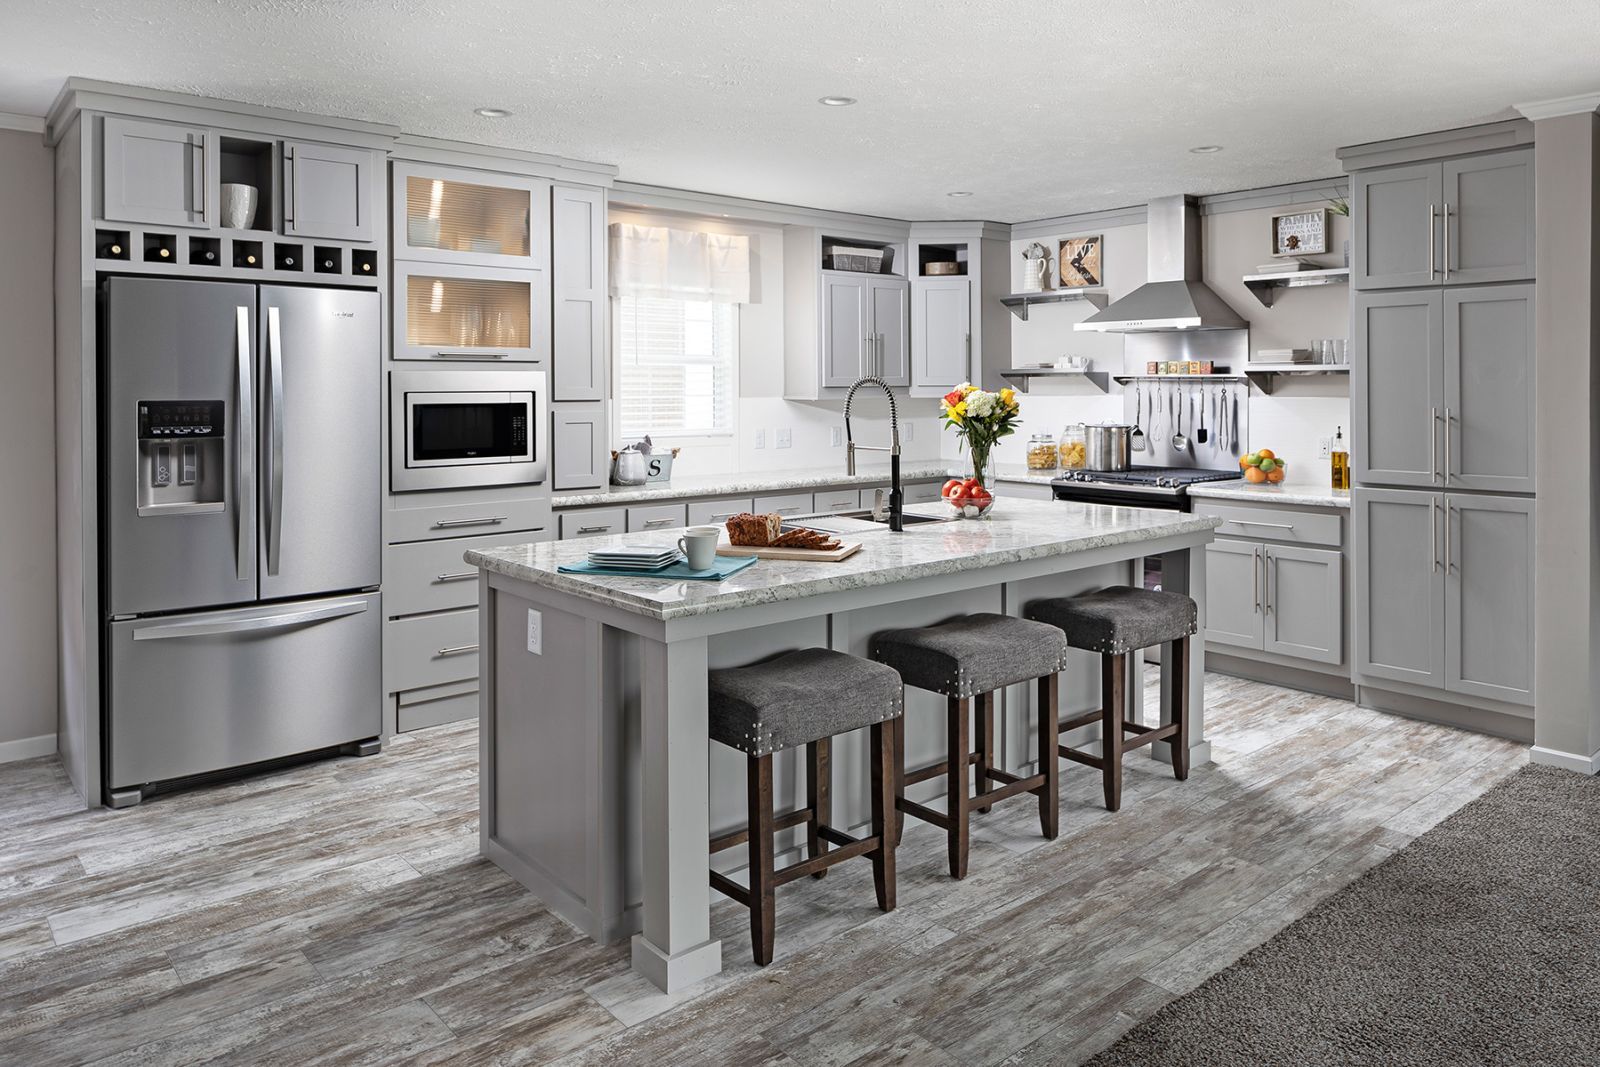 Kitchen with Island and Stainless Steel Appliances